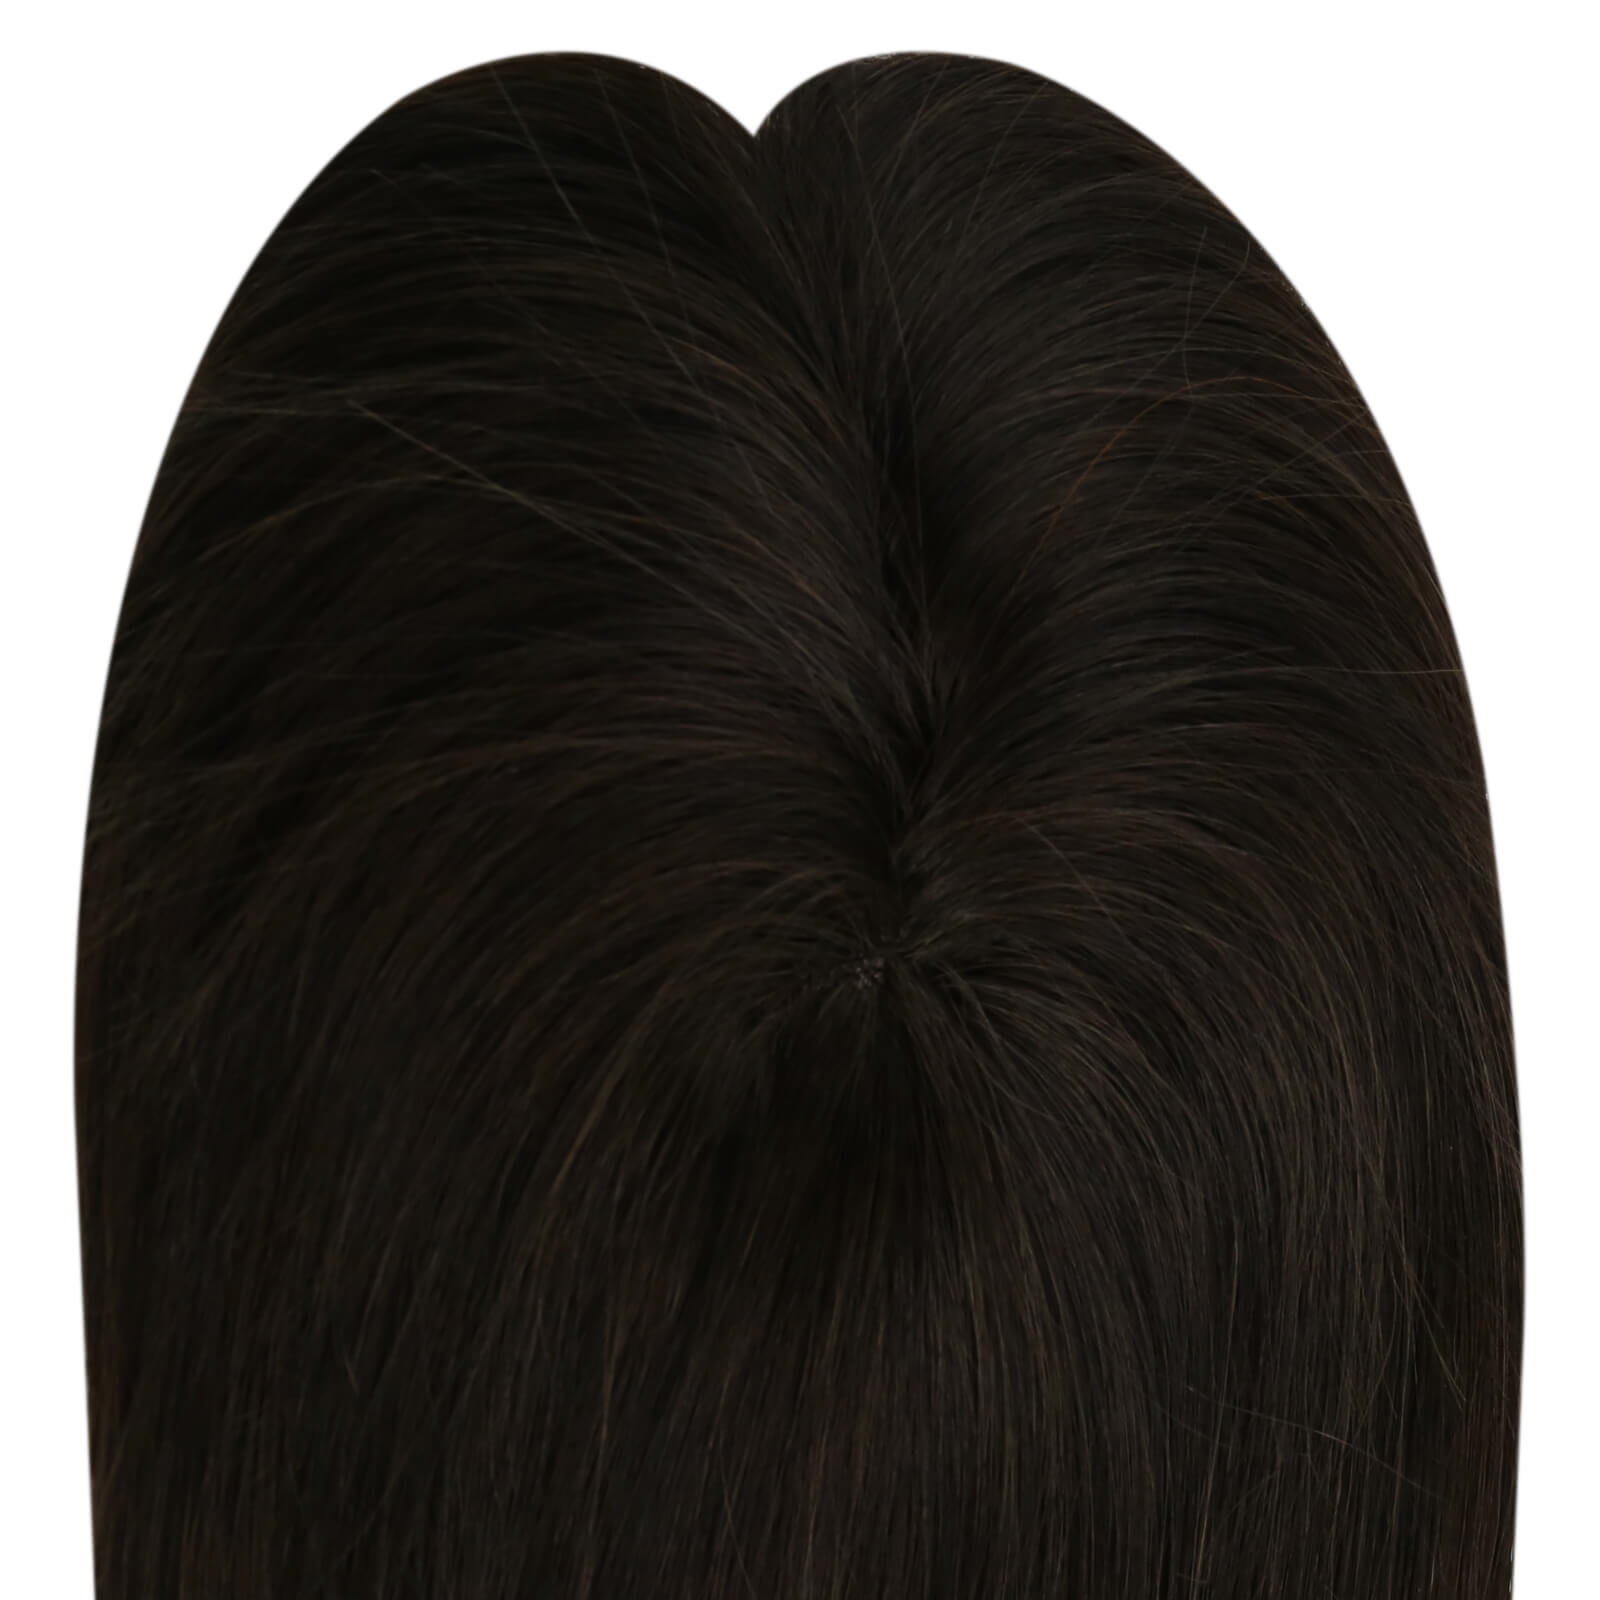 Topper Hair Pieces 100% Human Hair For Women Darkest Brown #2-3*5 inch |Youngsee